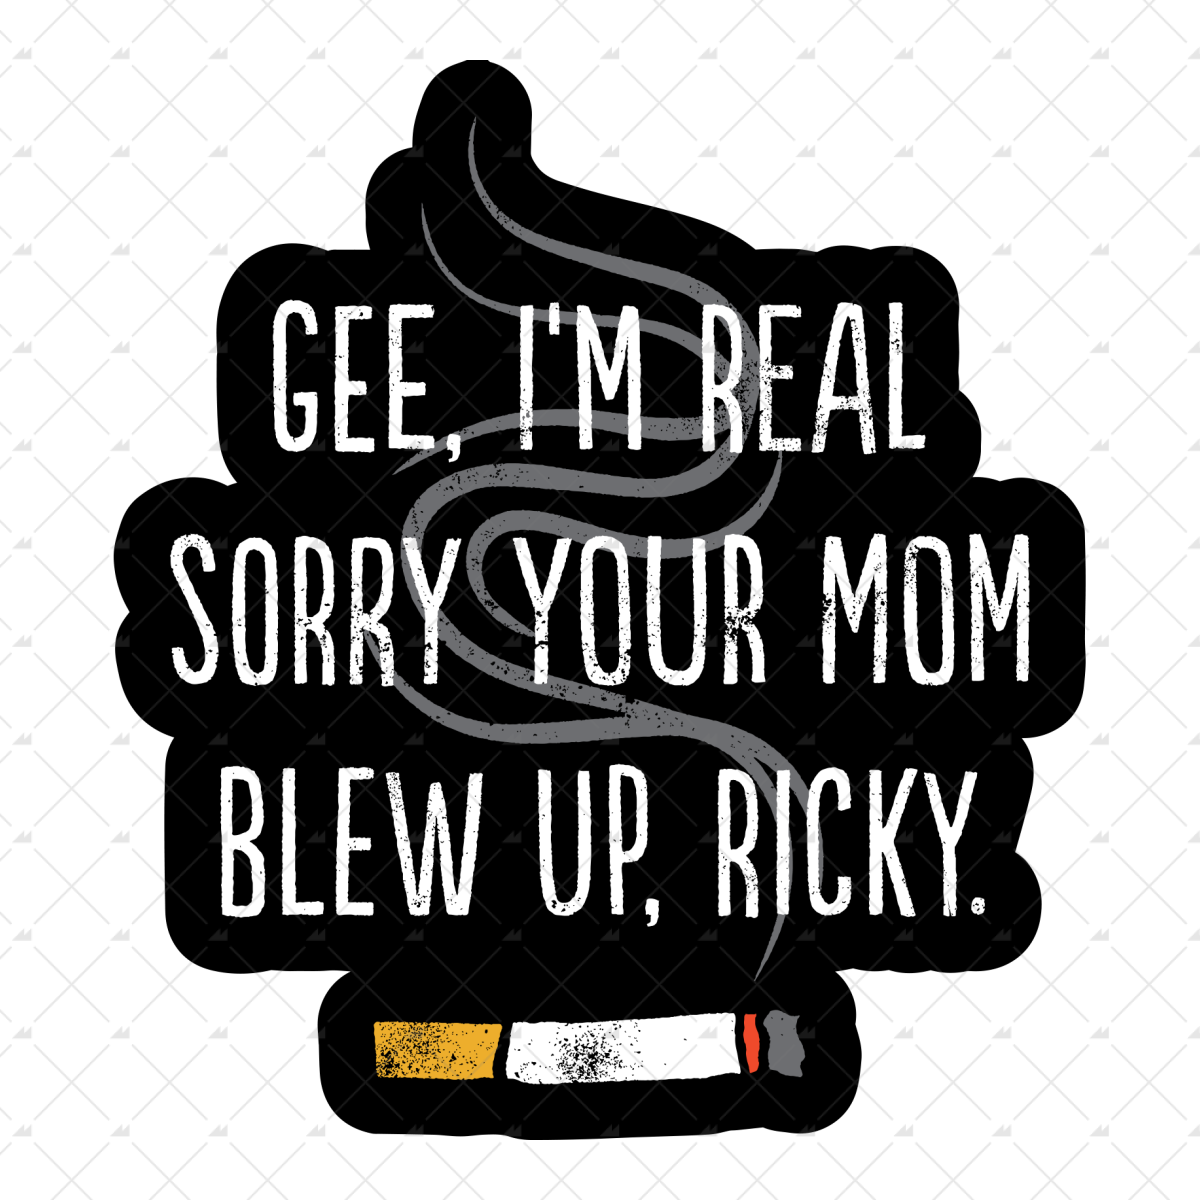 Gee I'm Really Sorry Your Mom Blew Up, Ricky - Sticker